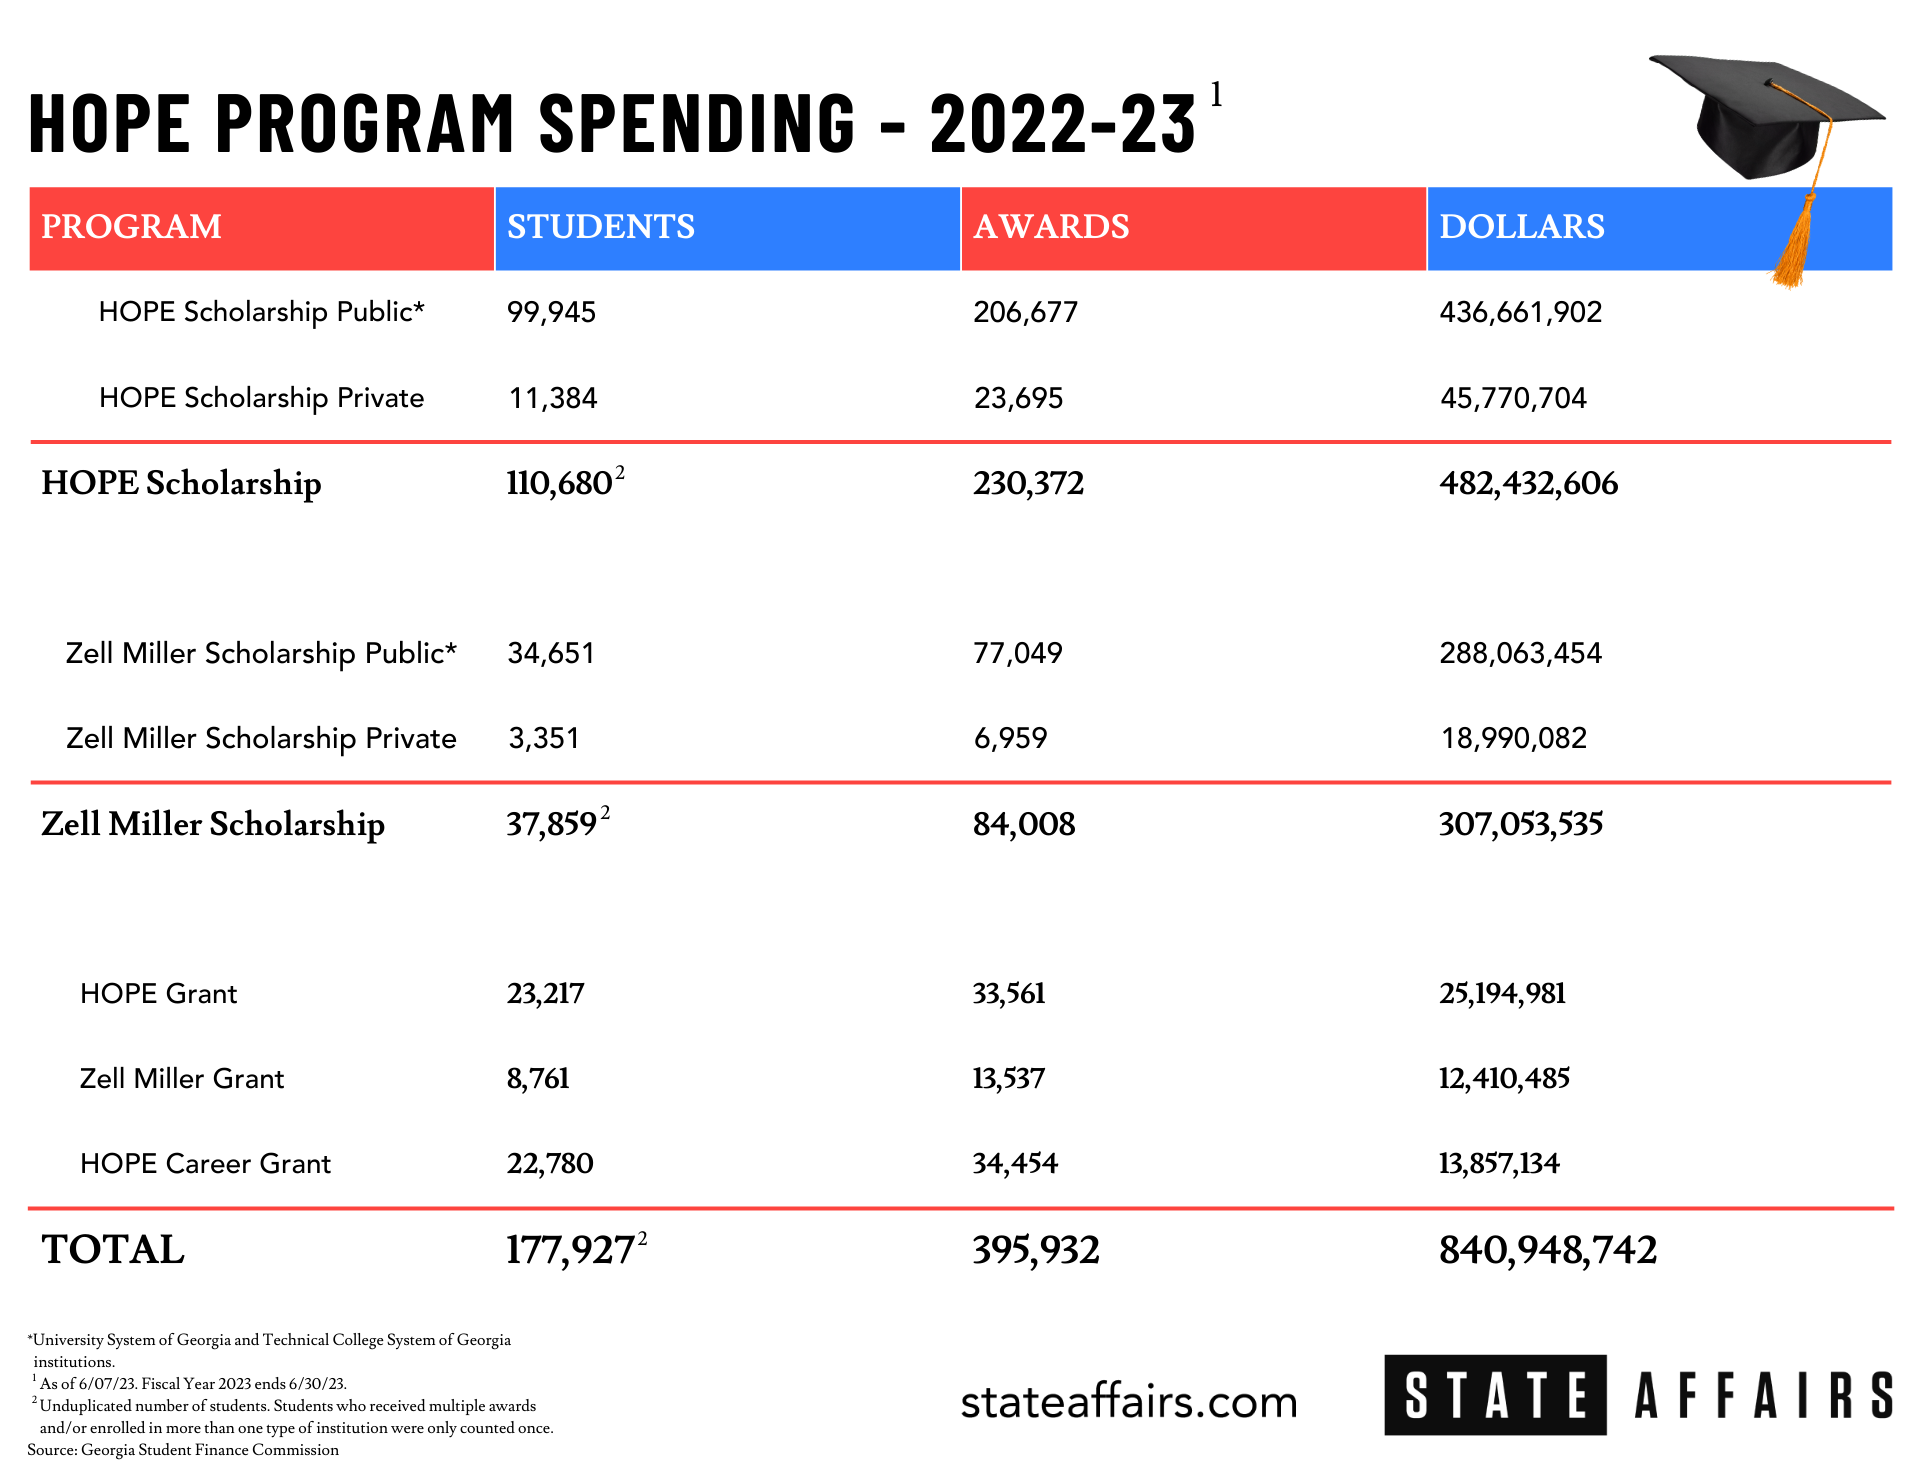 HOPE program spending for scholarships and grants in Fiscal Year 2022 - 2023